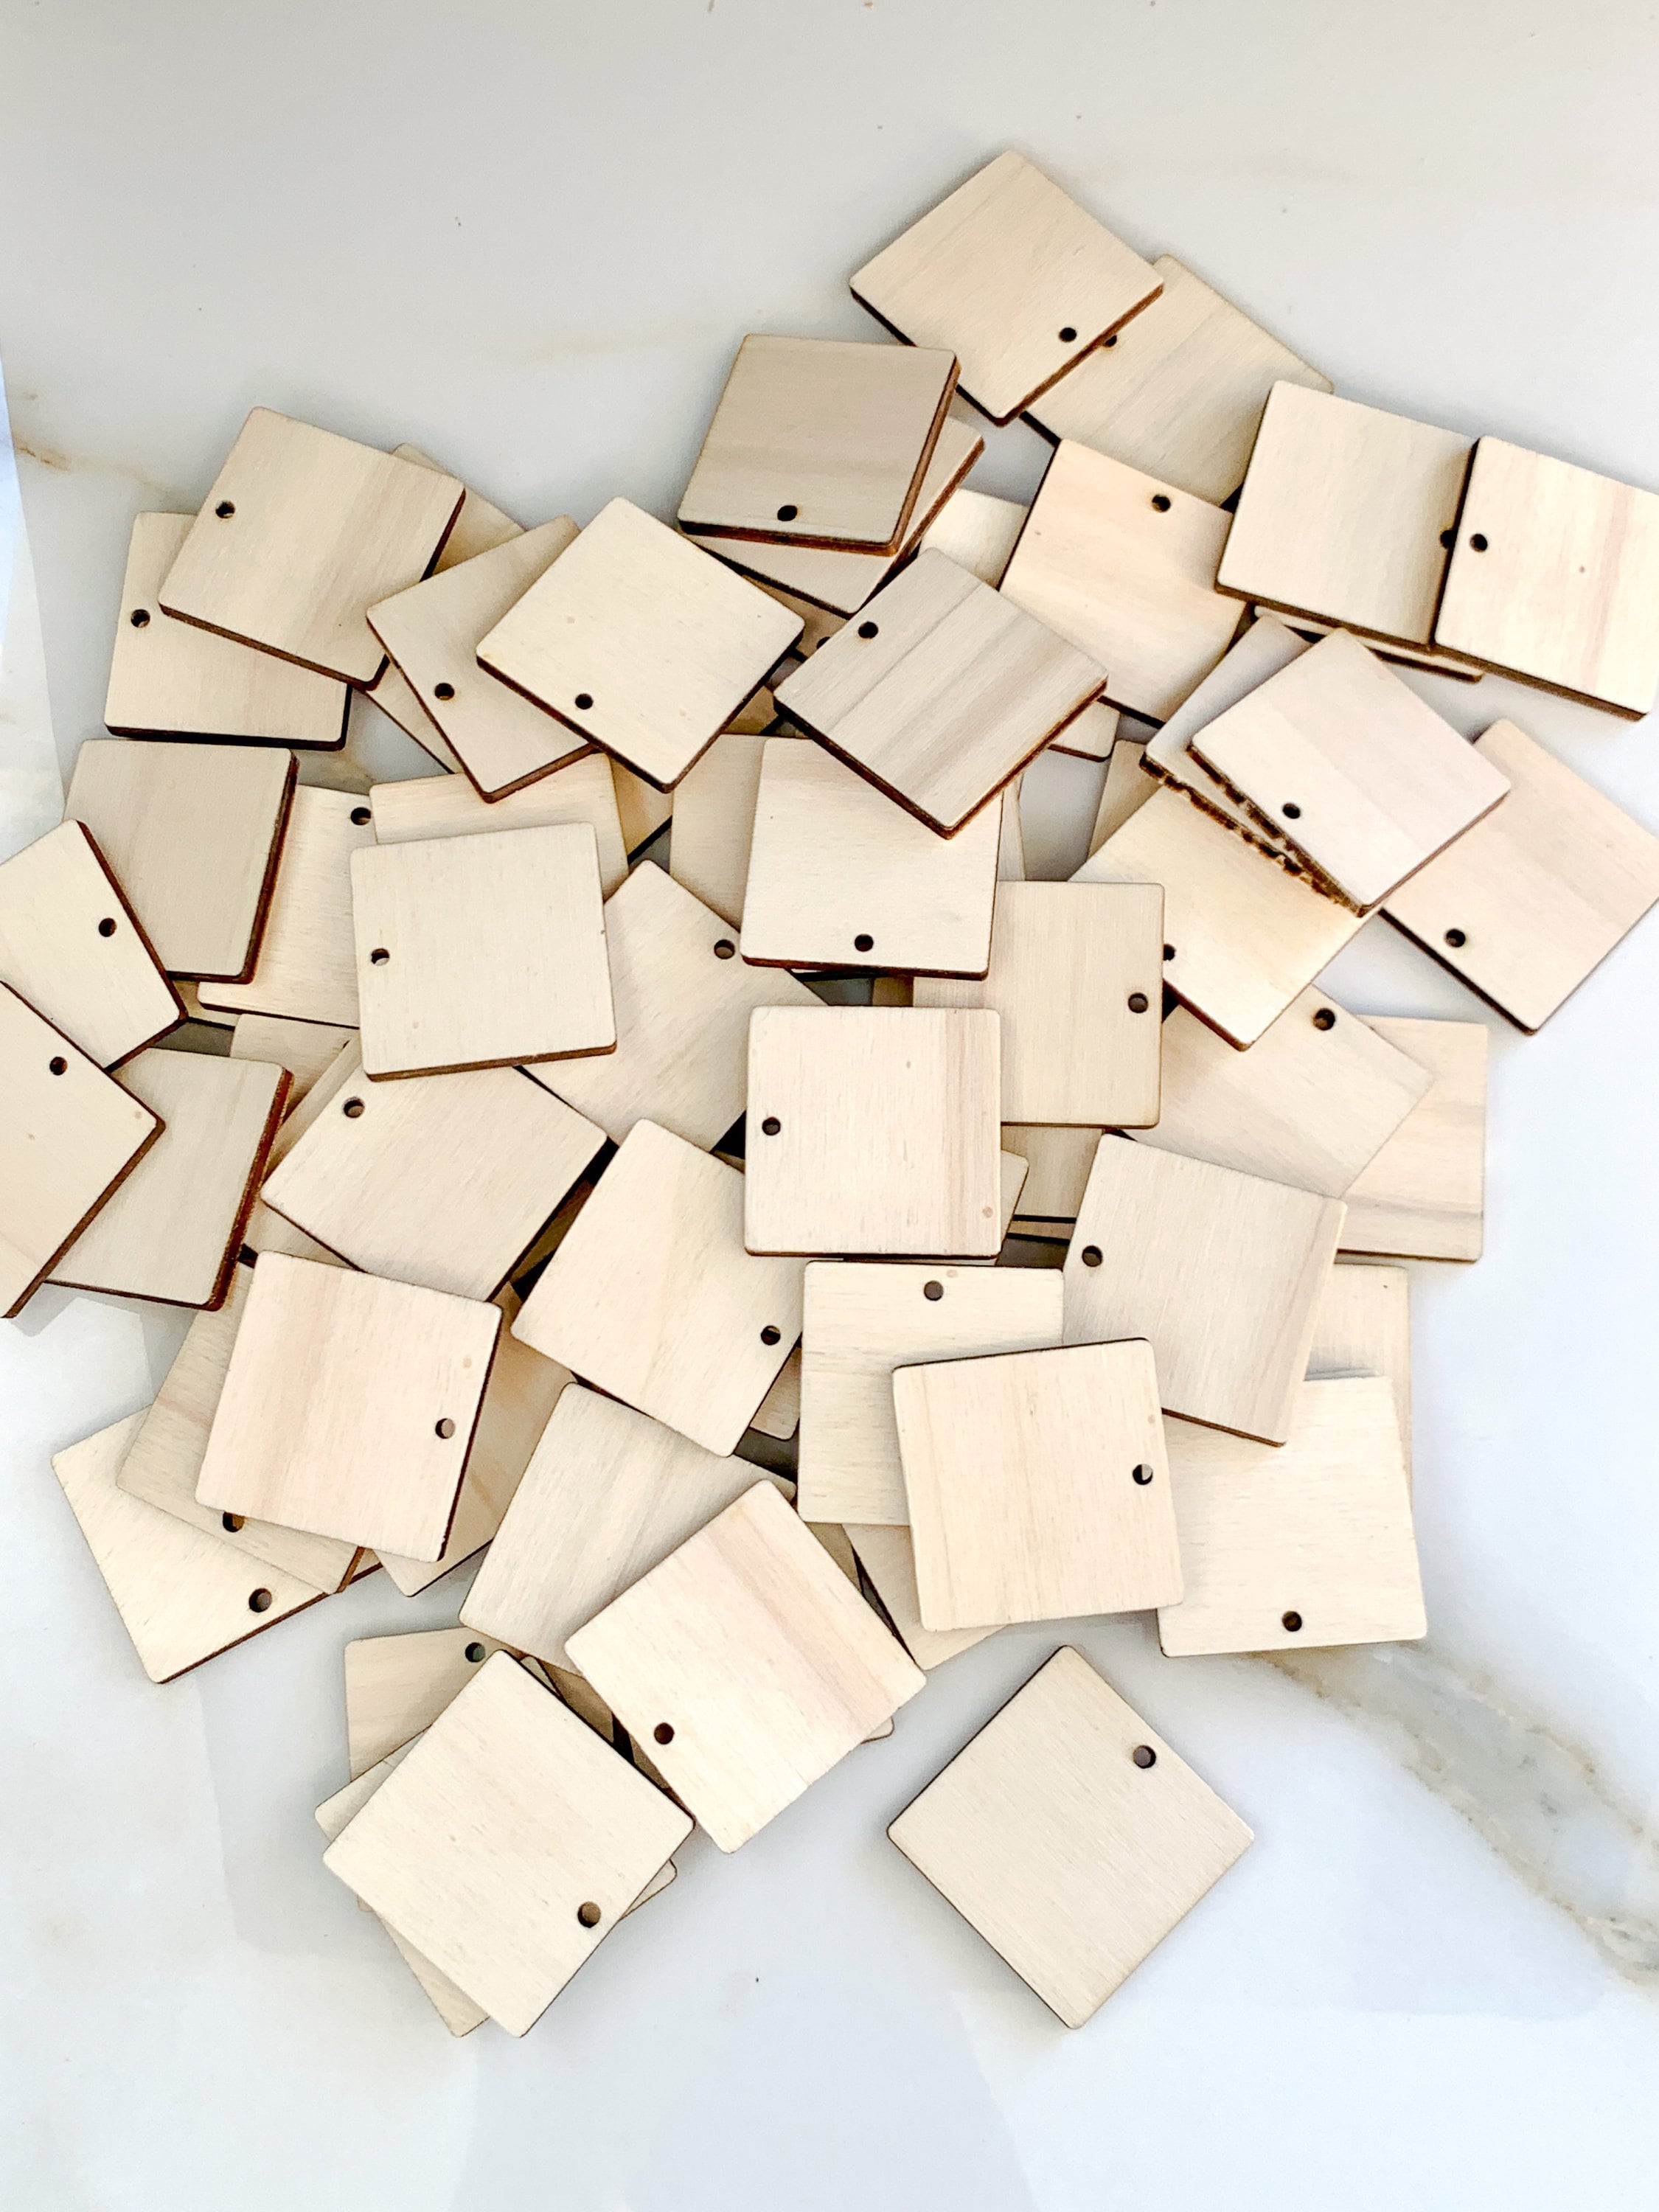 Wood Squares Tiles Unfinished for Crafting, Wooden Craft Squares, DIY Craft  Supplies Wood Square Shape, Wood Base Game Pieces Small Blocks 